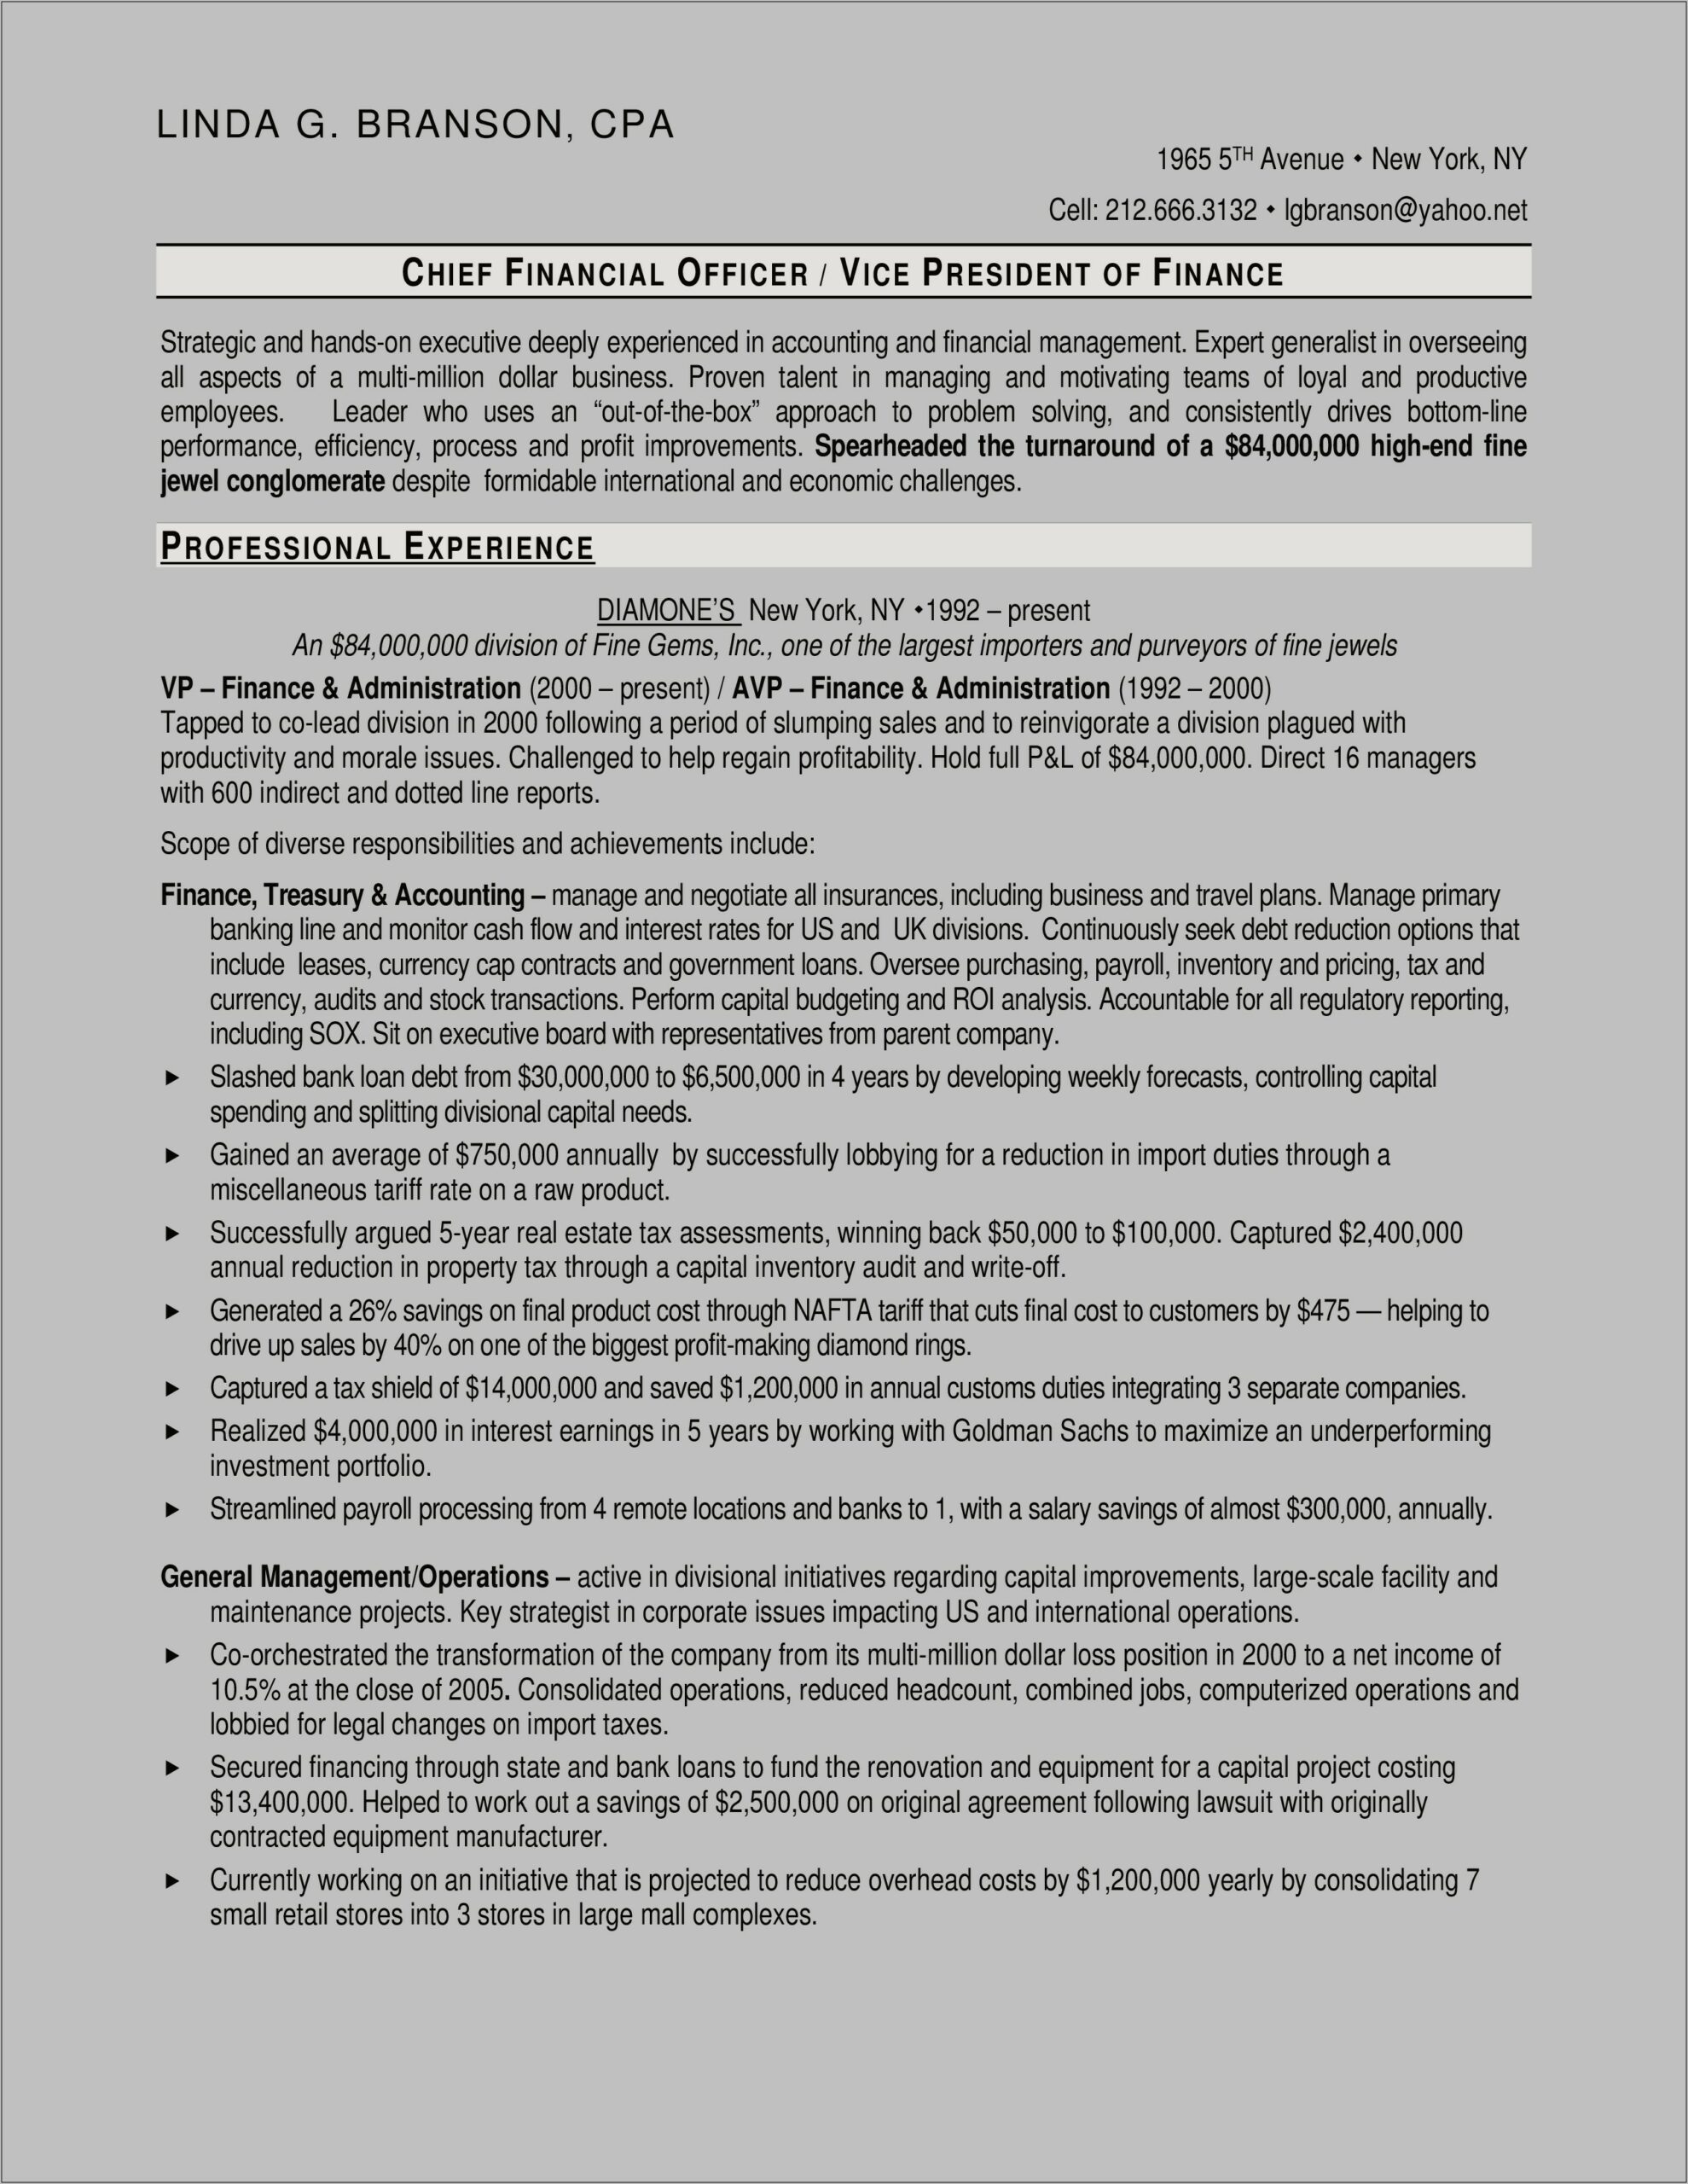 Chief Financial Officer Resume Objective